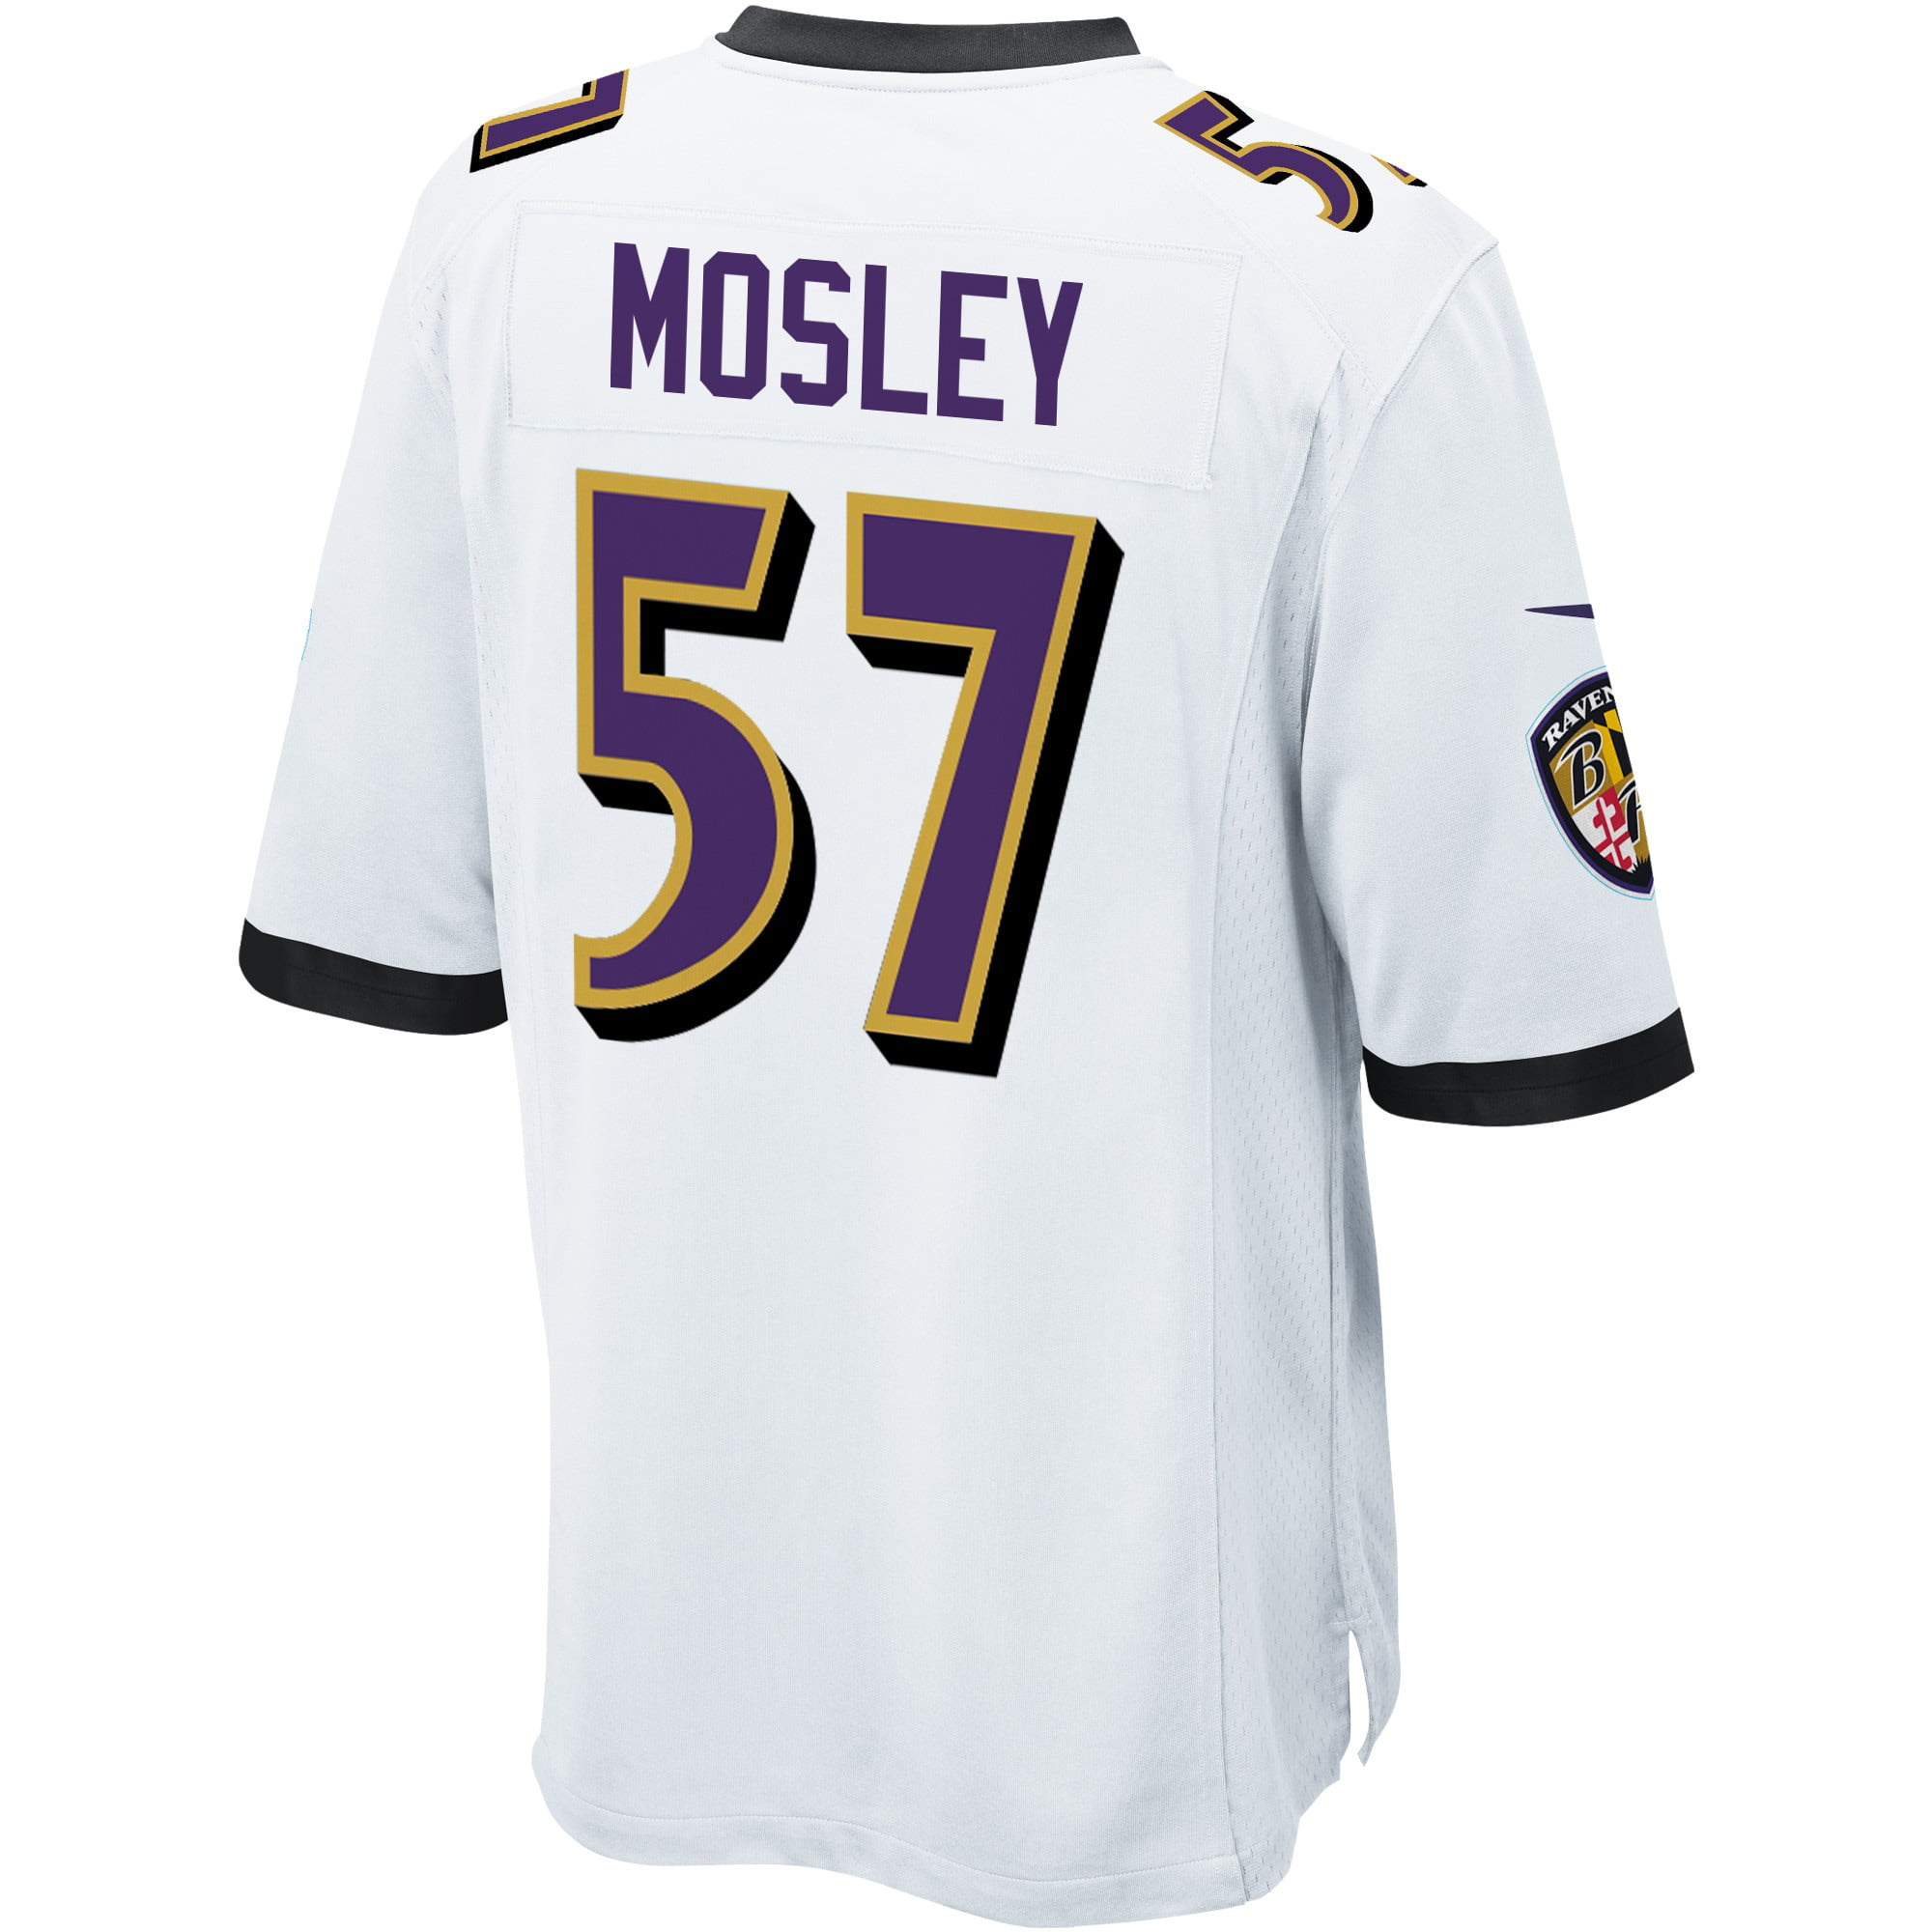 cj mosley youth jersey